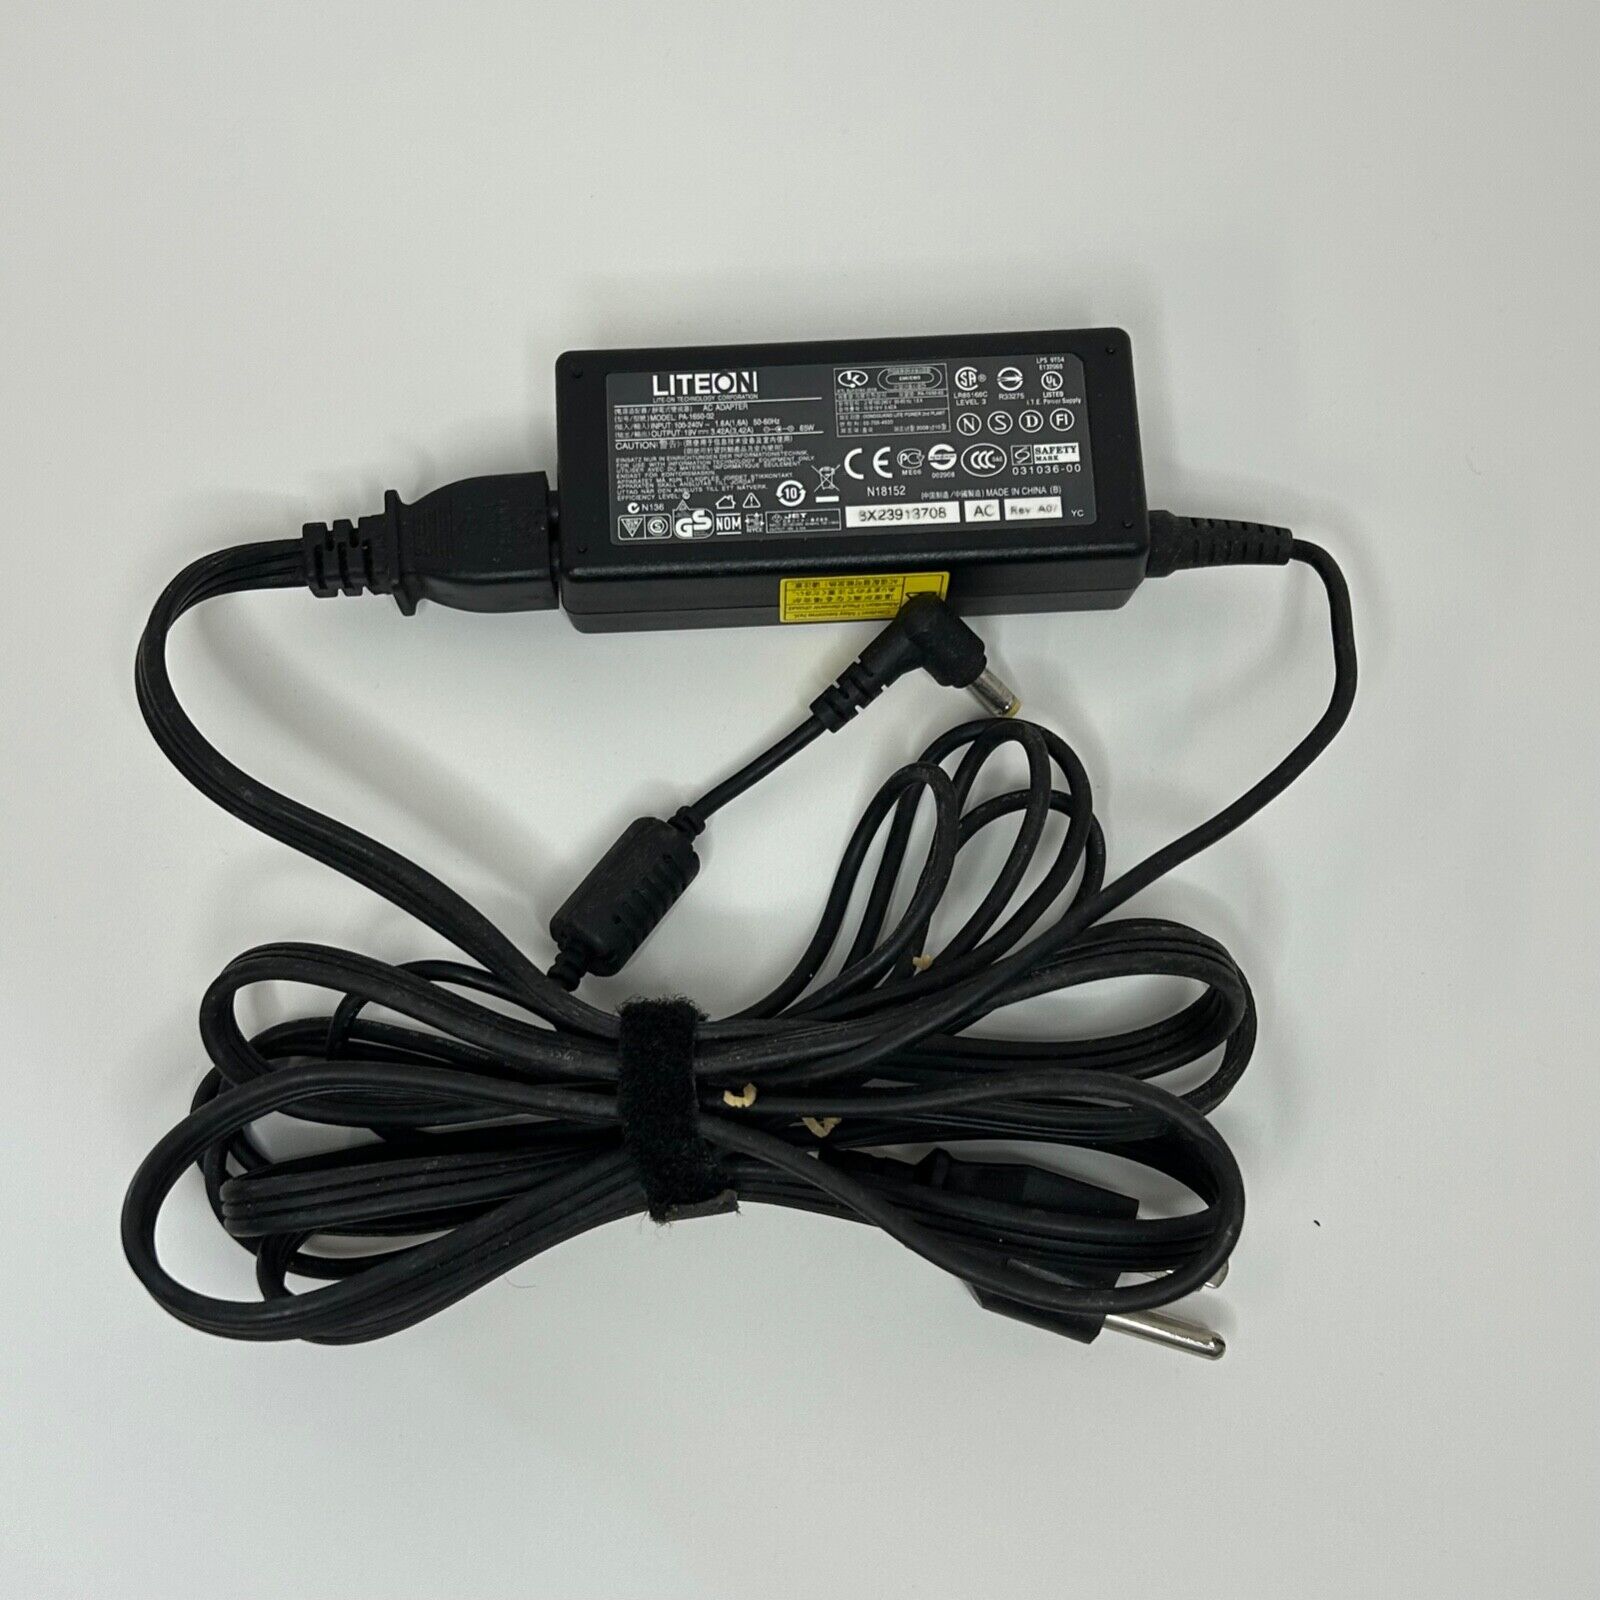 Lite-On PA-1650-02 AC Adapter 19V 3.42A w/cord: Acer, Gateway, eMachines